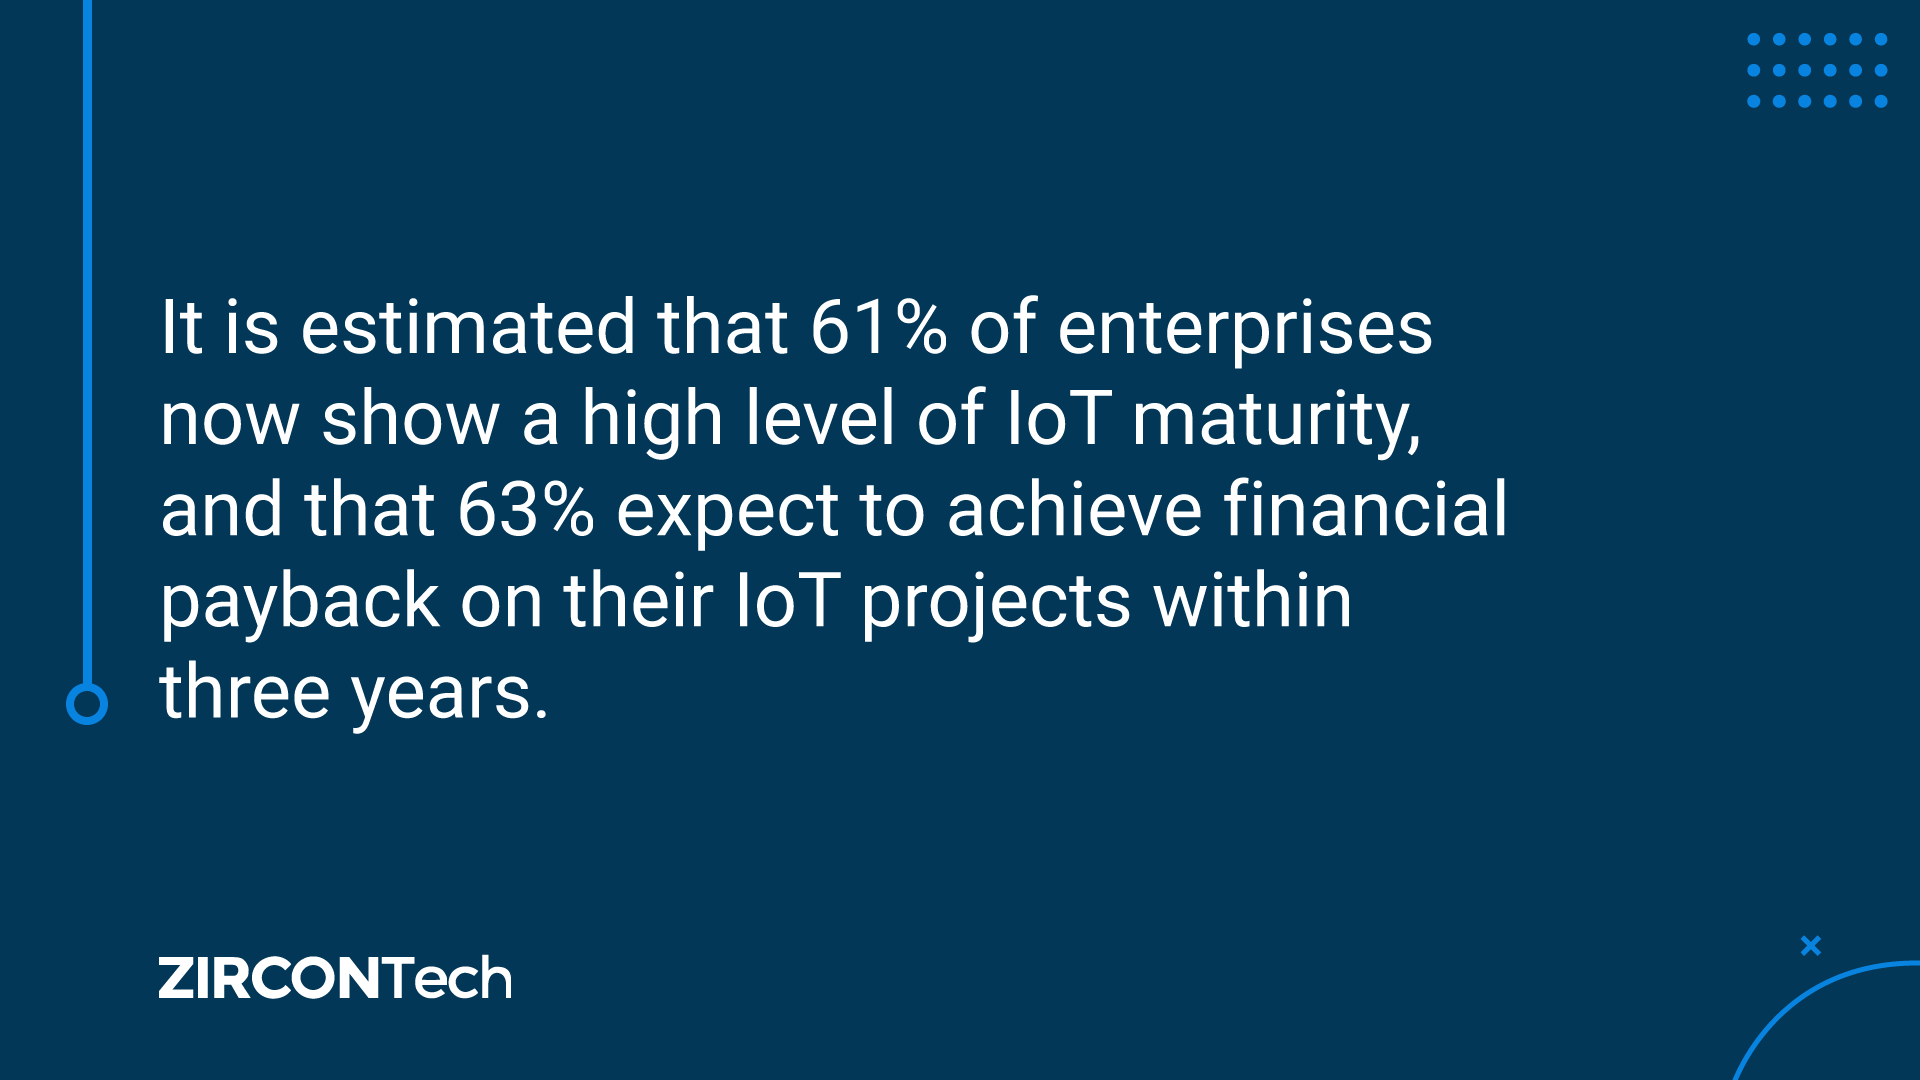 It is estimated that 61% of enterprises now show a high level of IoT maturity, and that 63% expect to achieve financial payback on their IoT projects within three years.